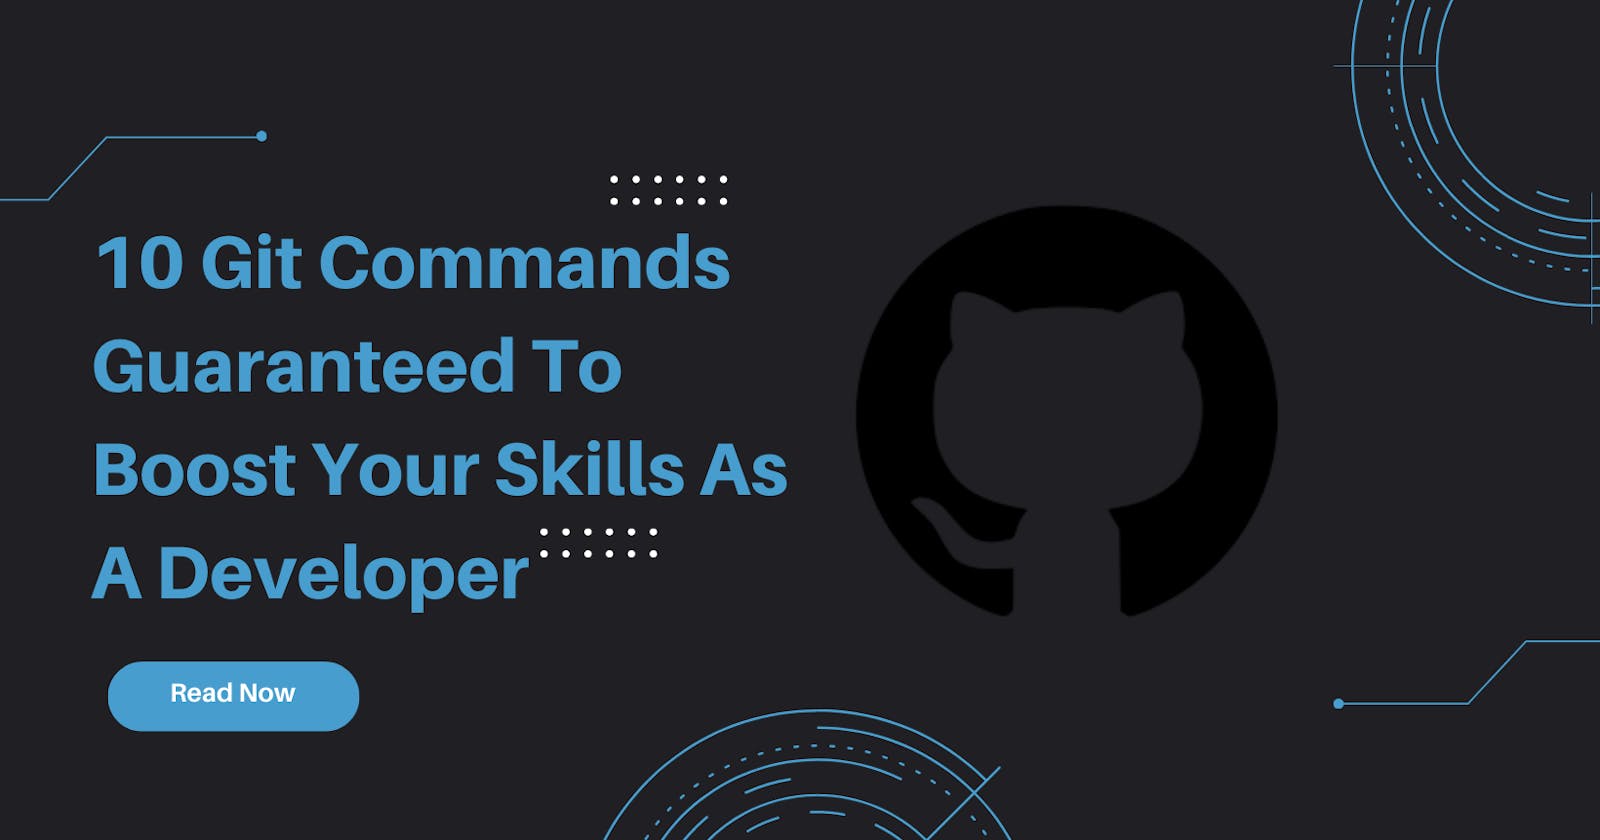 10 Git Commands Guaranteed To Boost Your Skills As A Developer